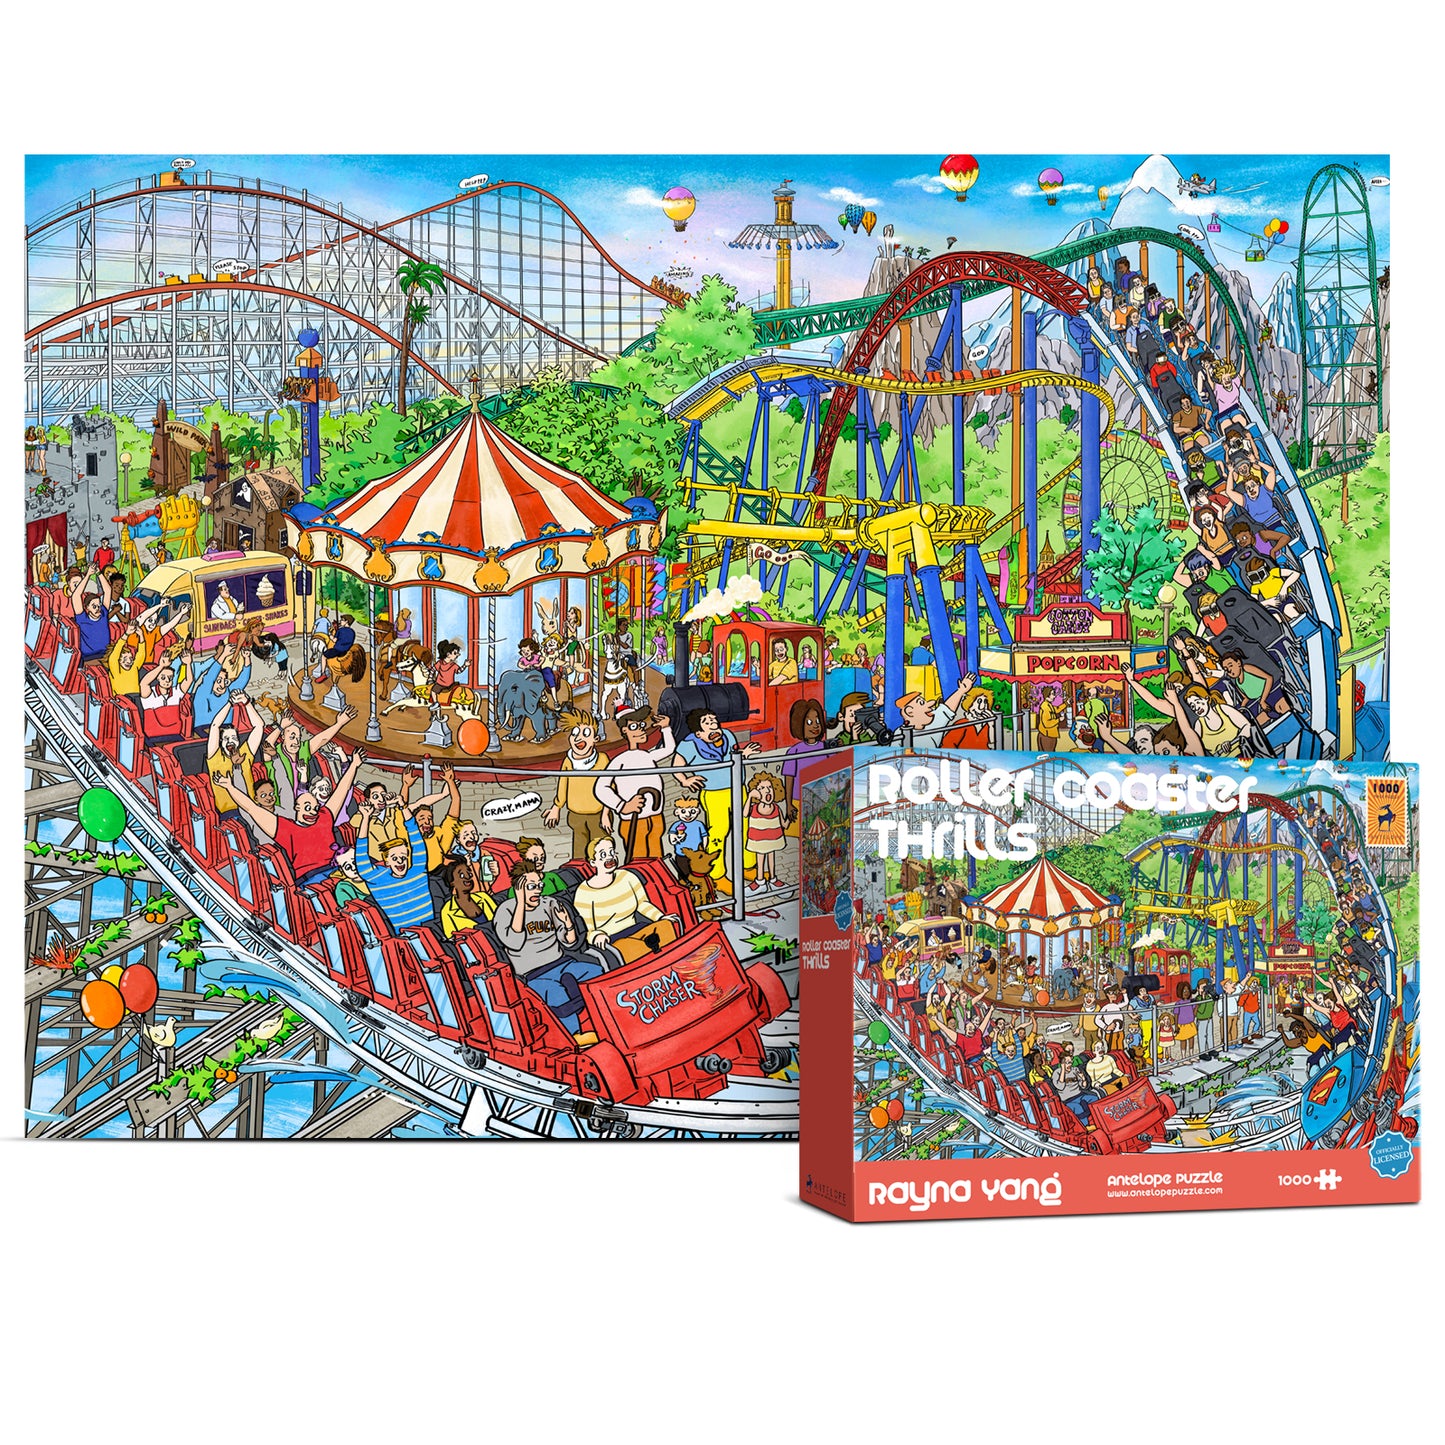 Roller Coaster Thrills Leisure Time 1000 Piece Jigsaw Puzzle